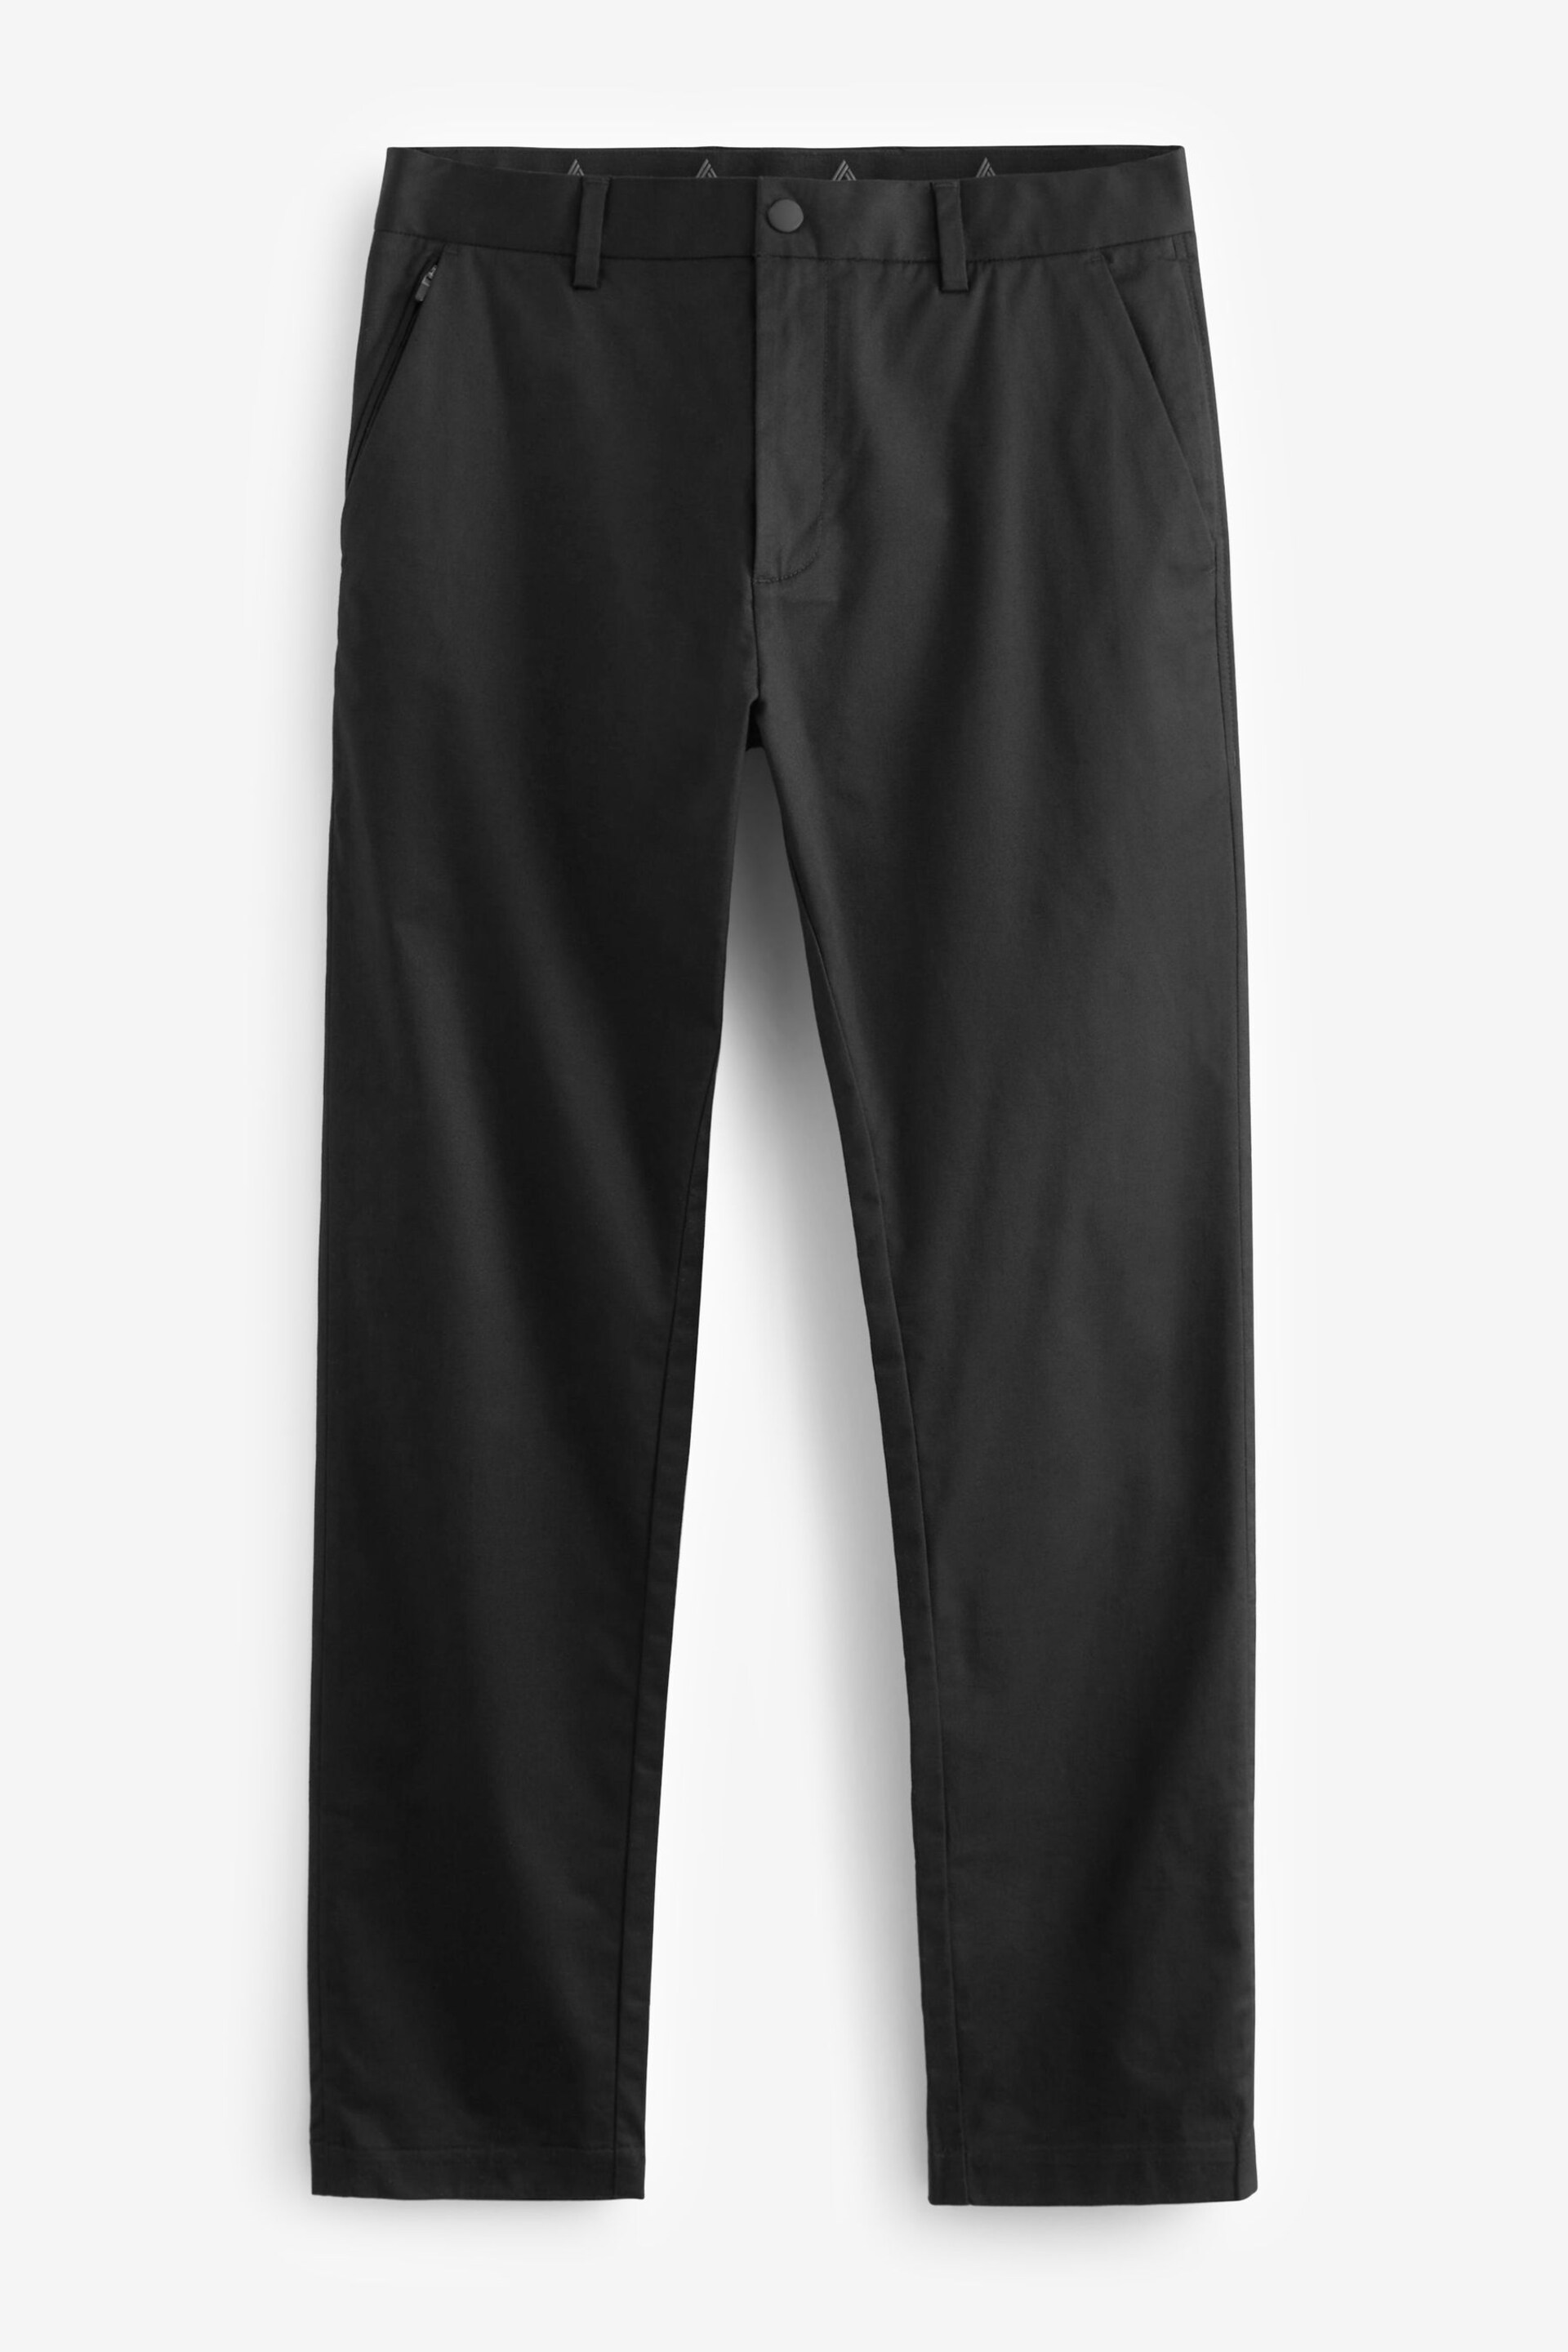 Black Slim Shower Resistant Golf Stretch Chino Trousers - Image 6 of 7